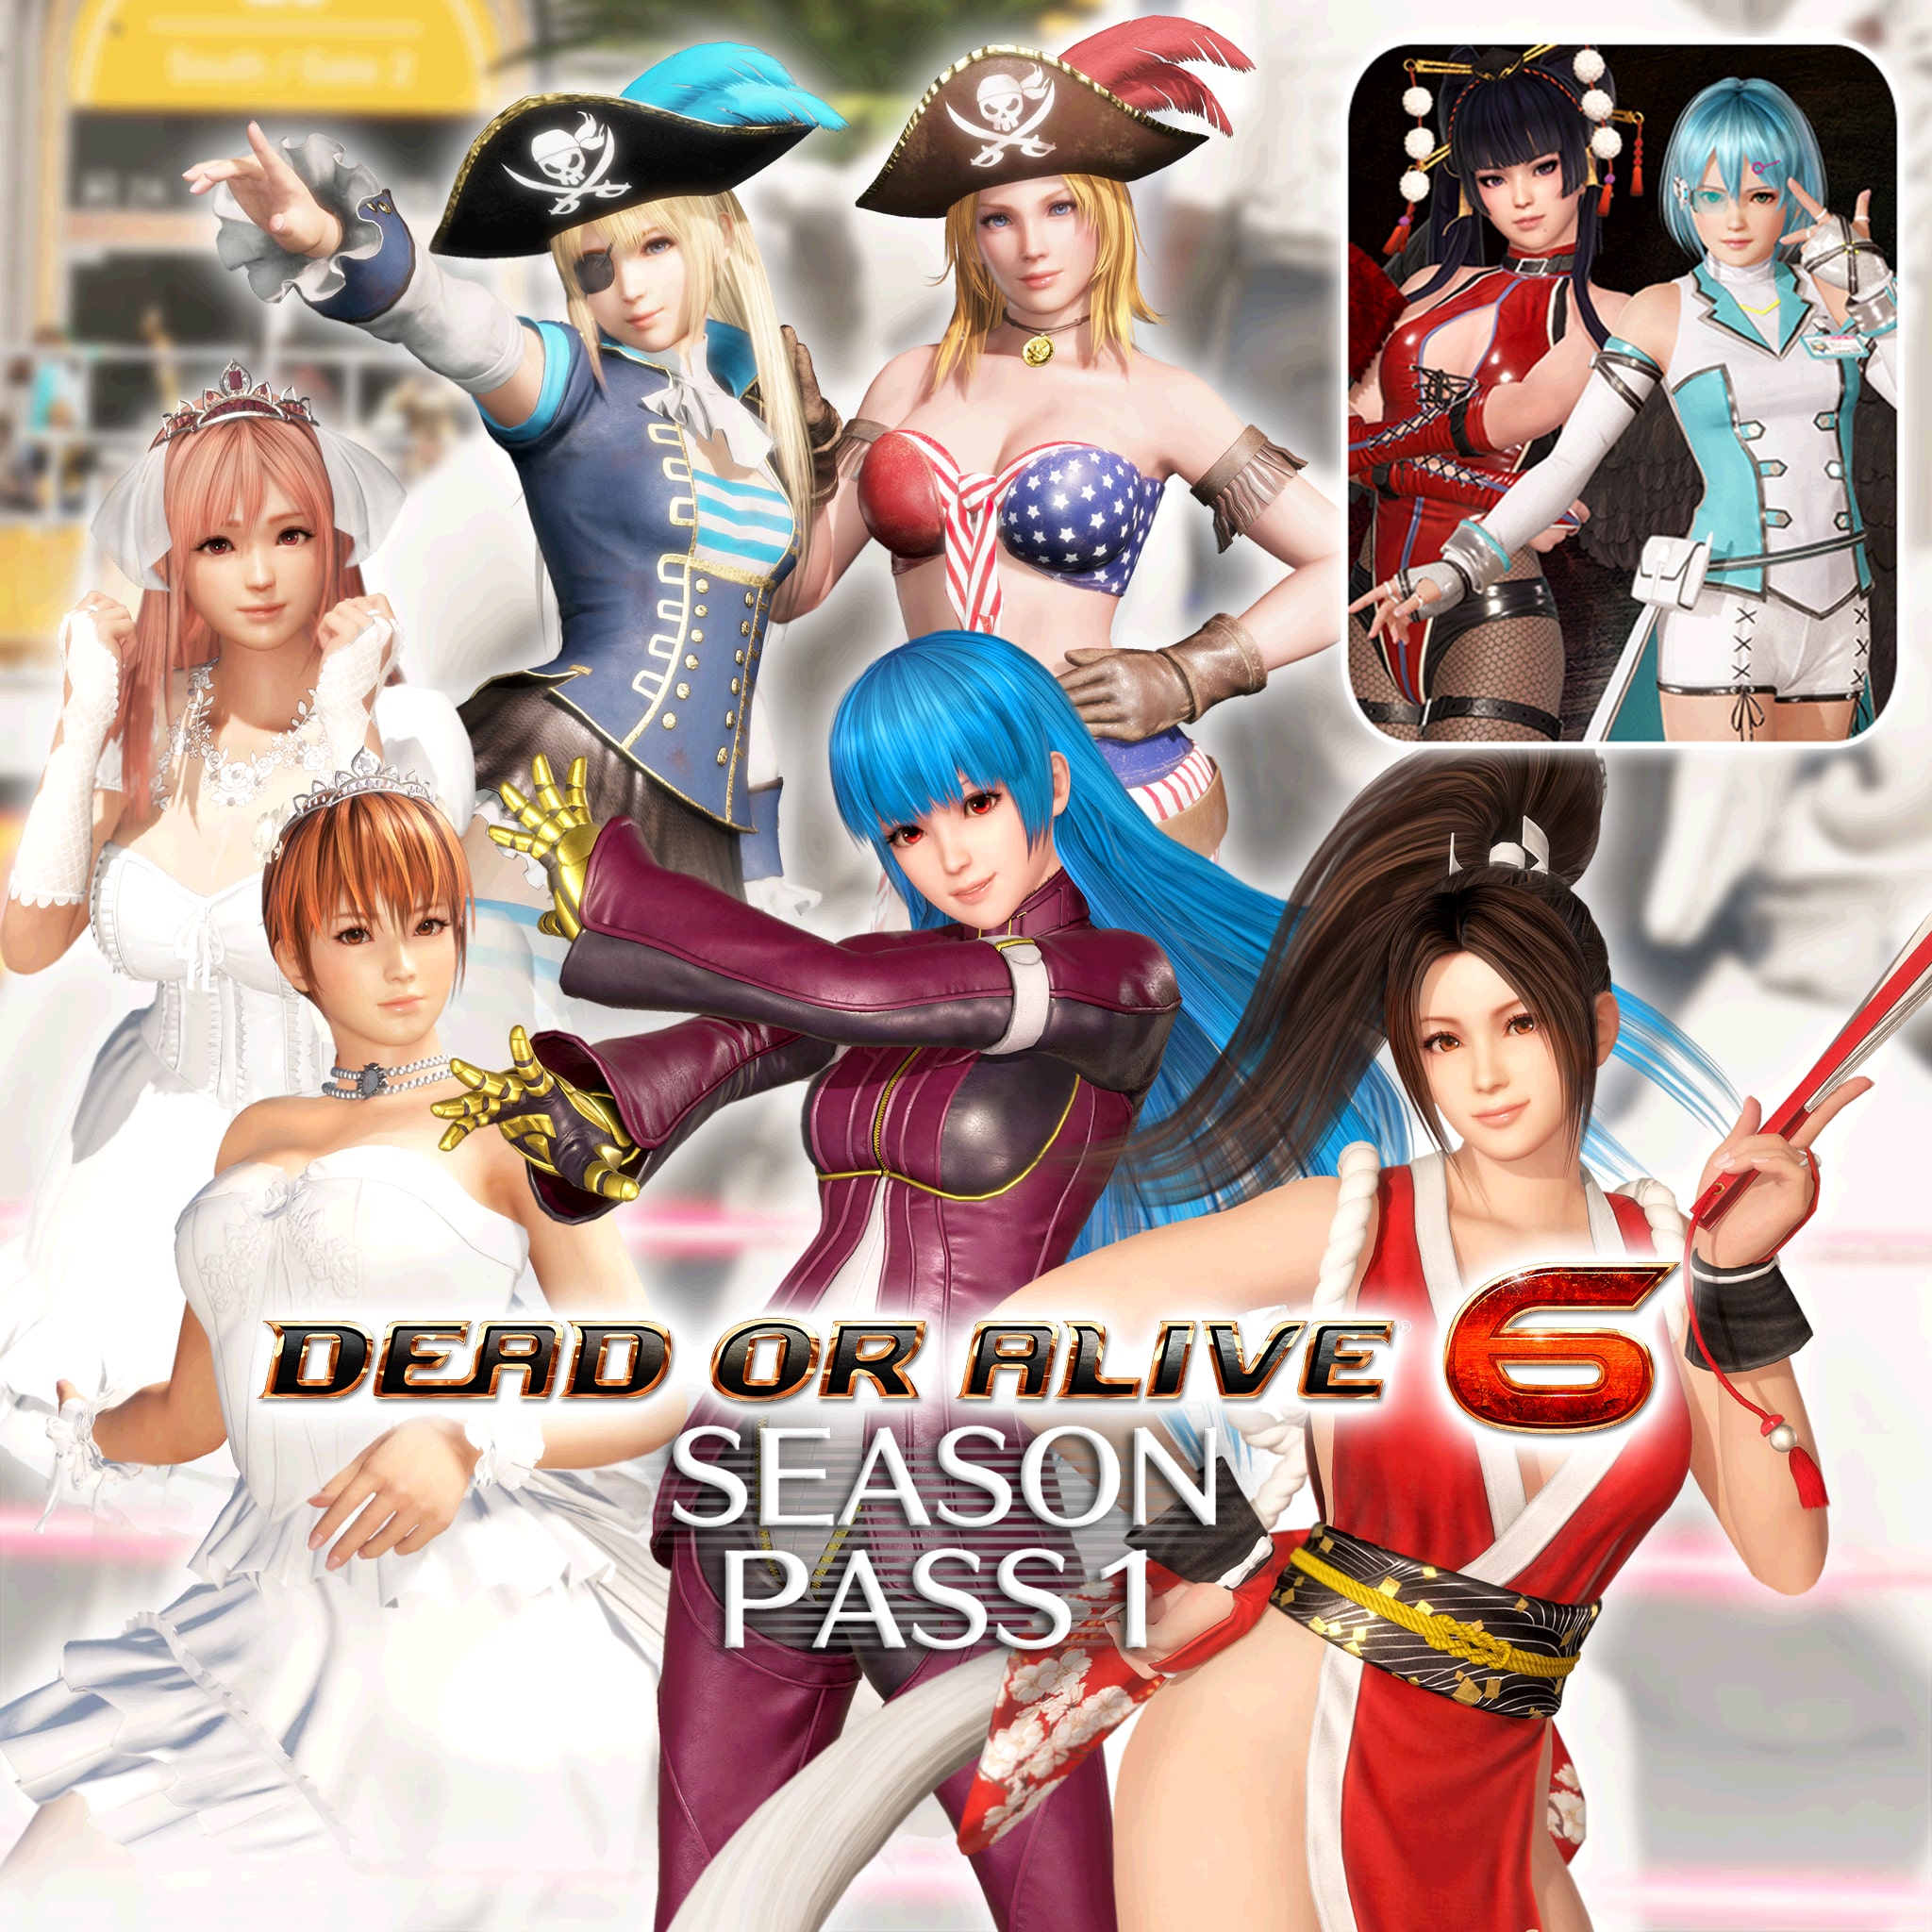 DEAD OR ALIVE 6 Pass stagione 1